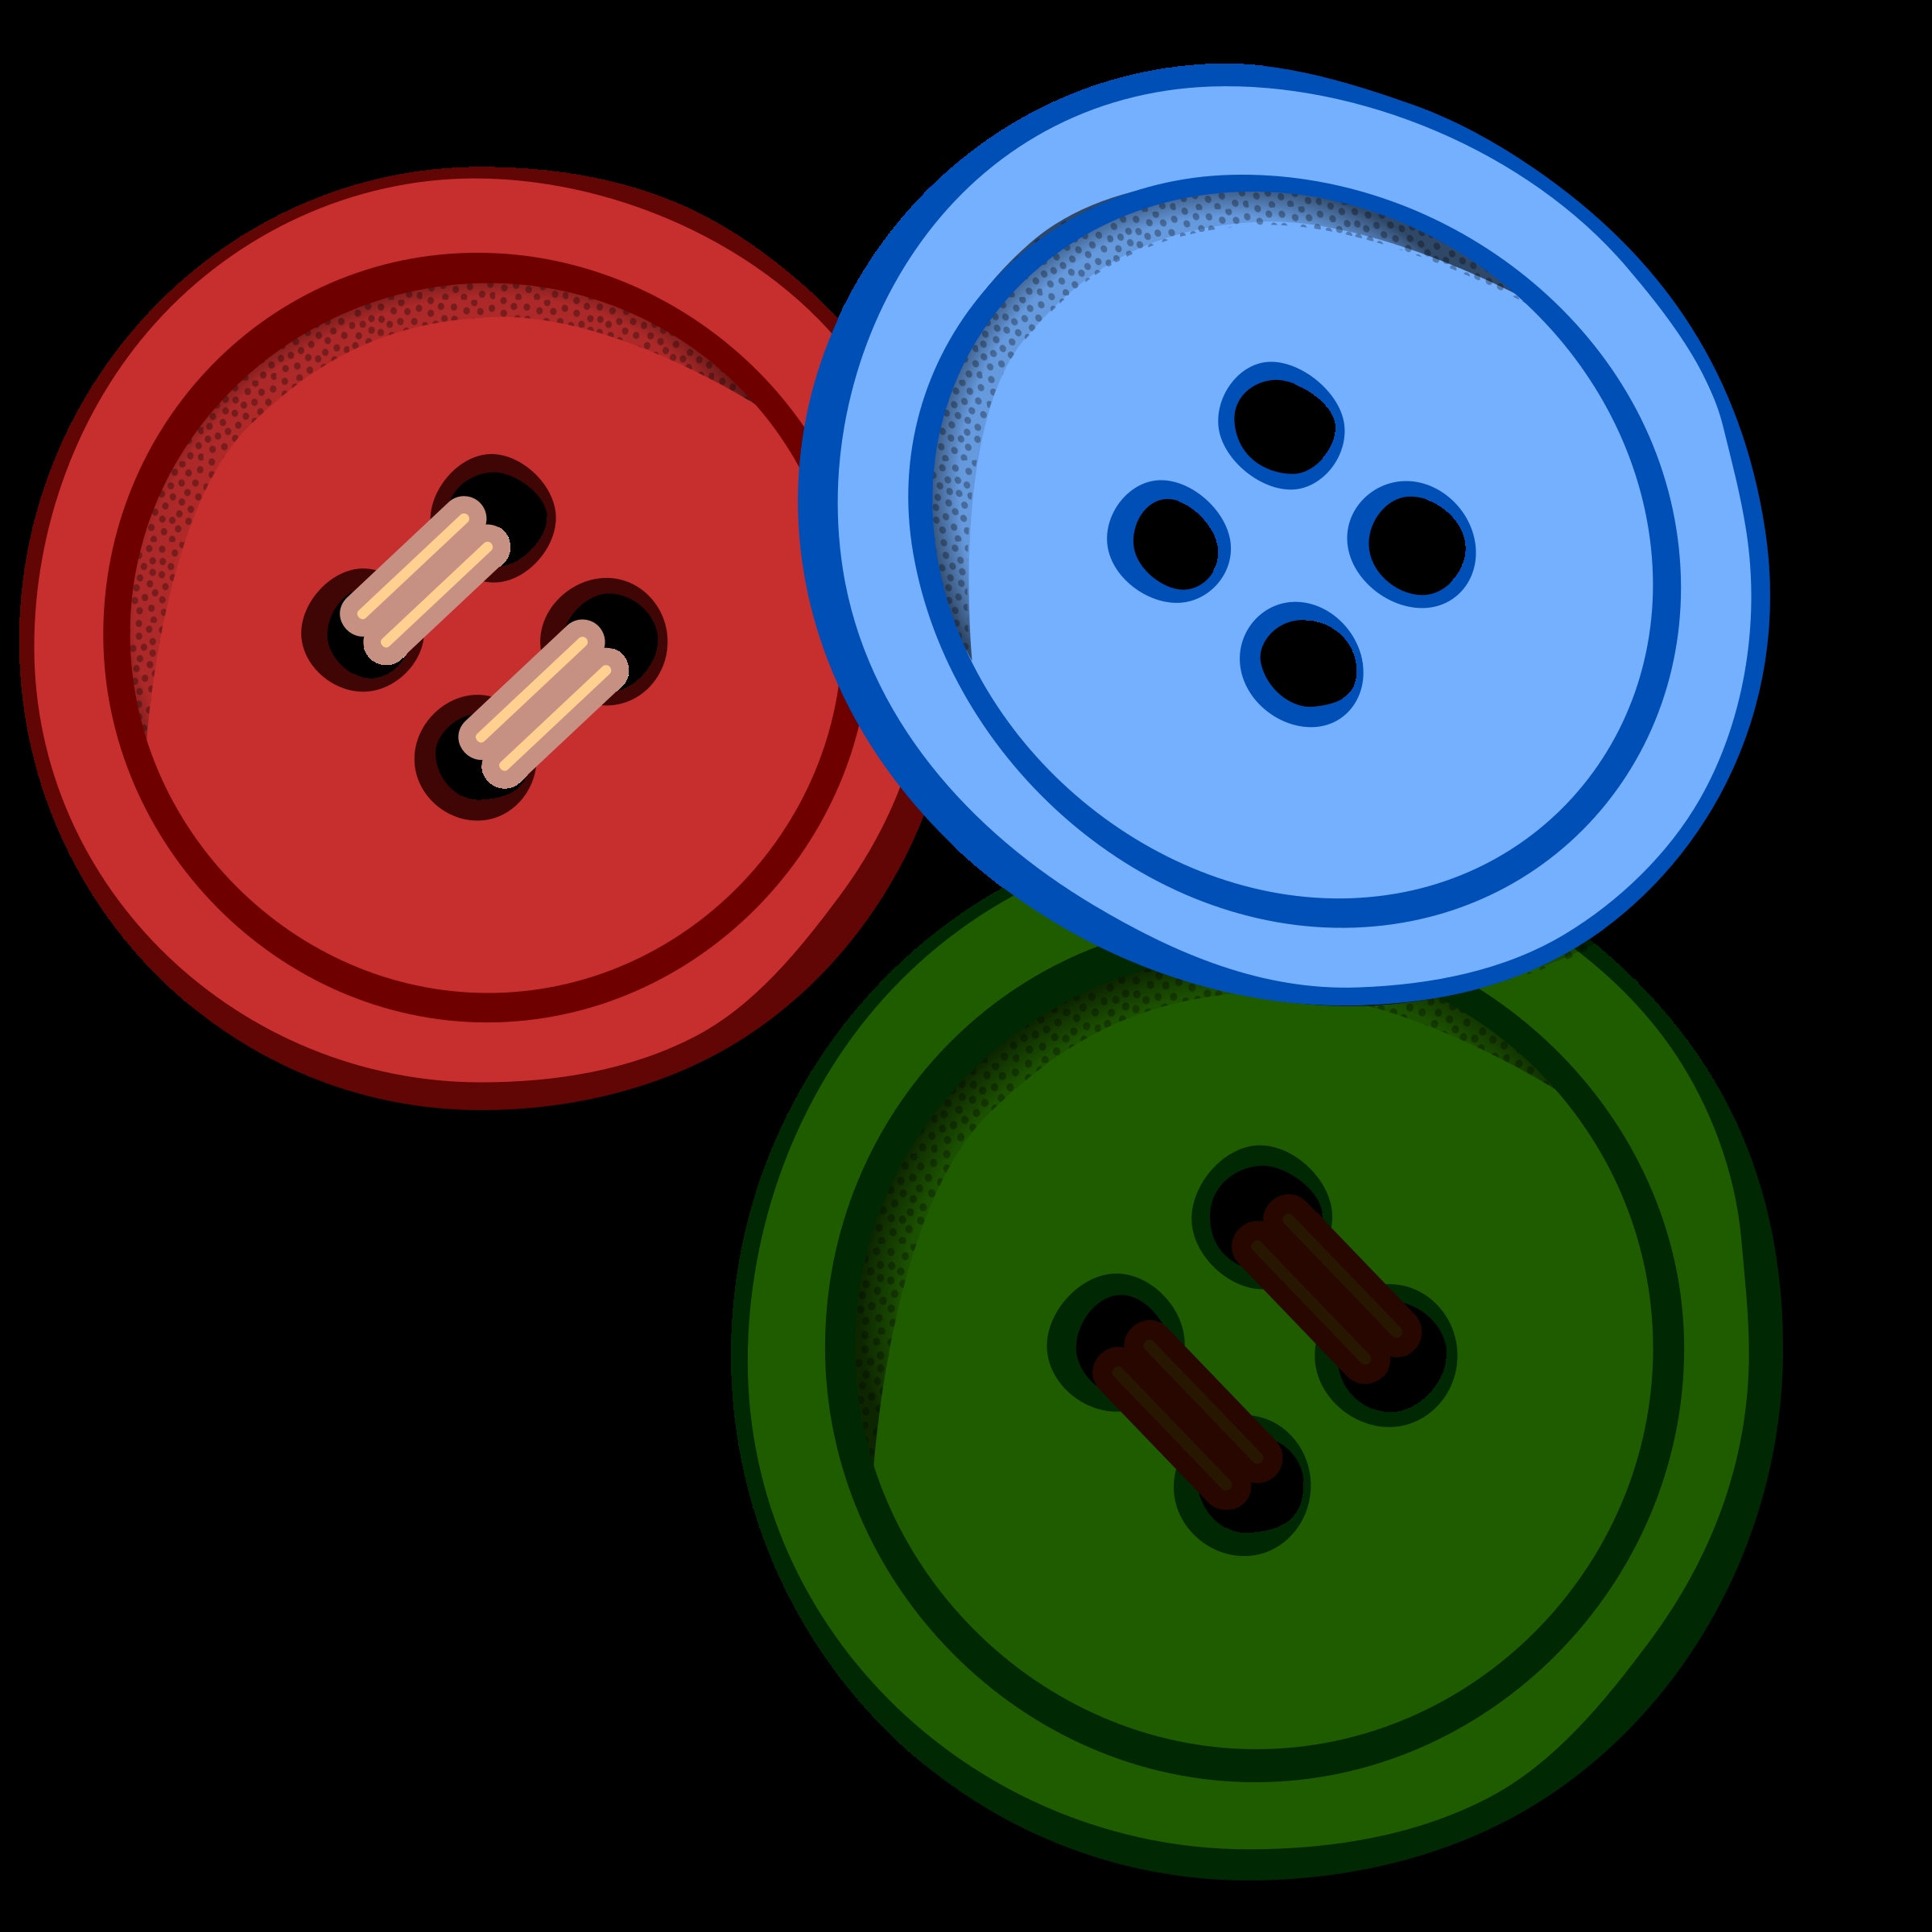 buttons clipart coloured